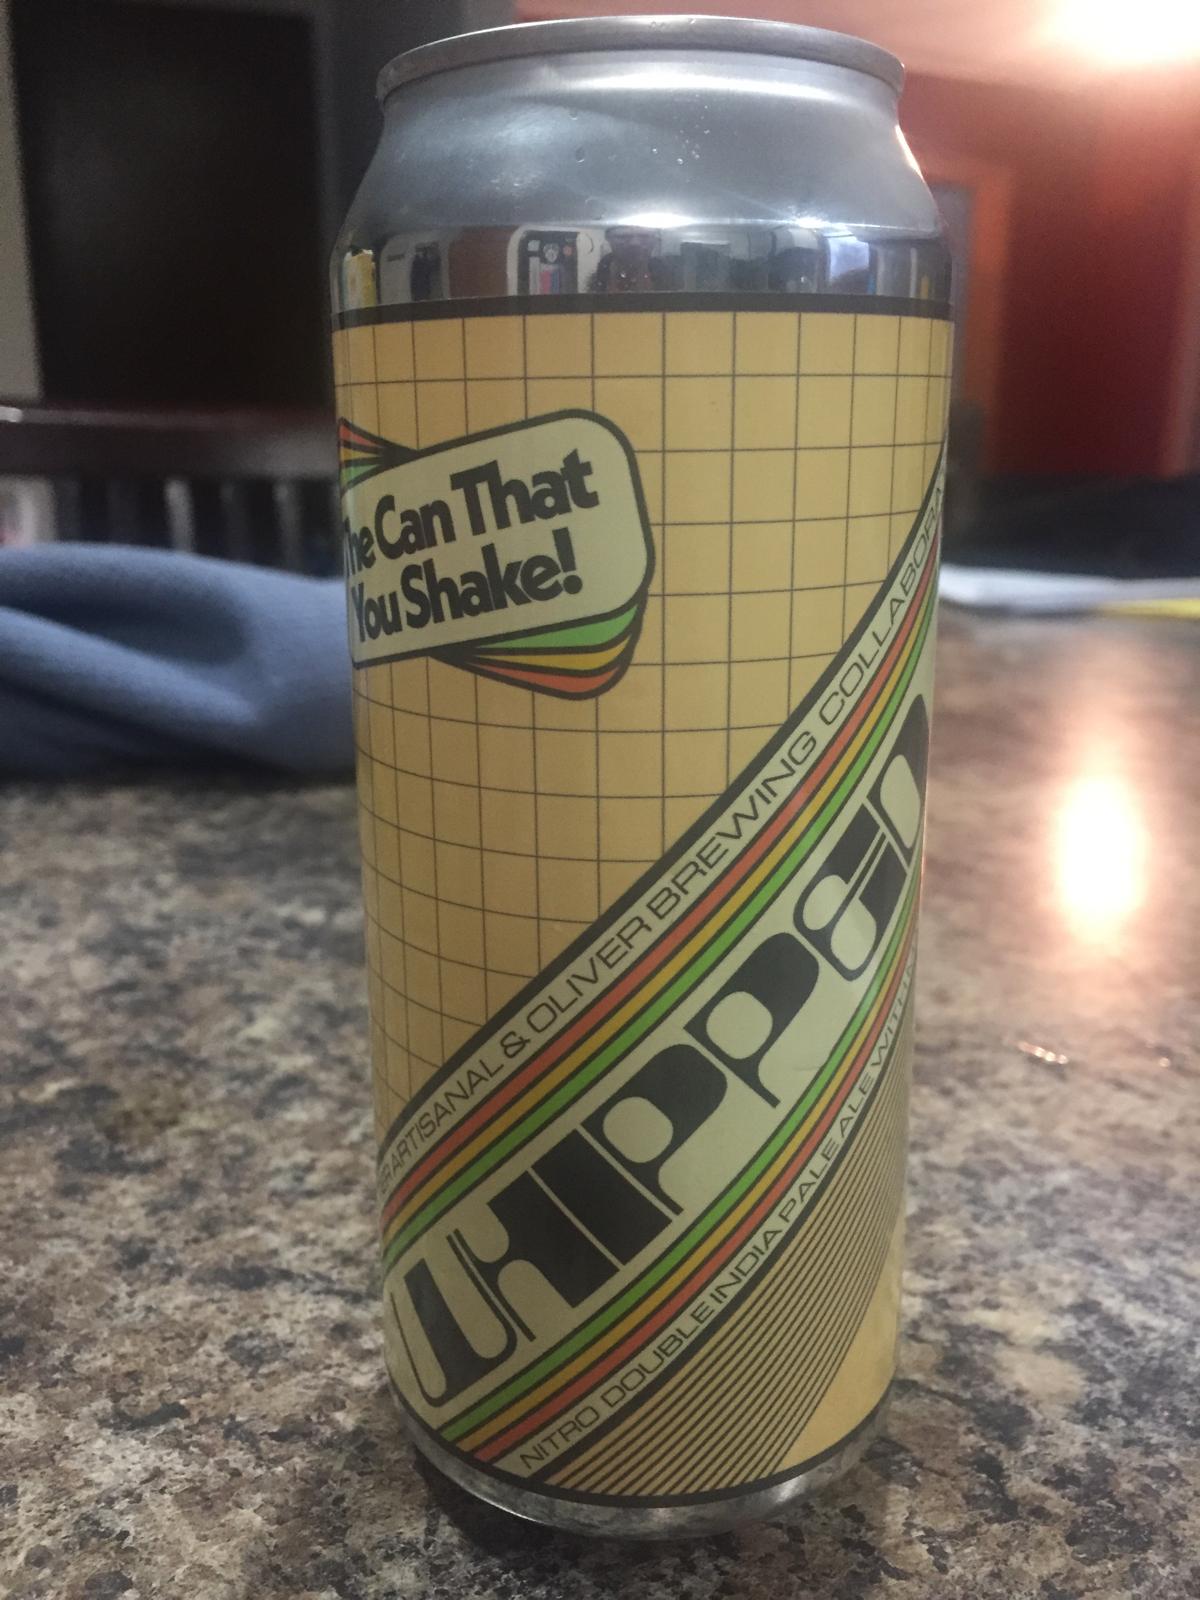 Whipped Volume 2 (Collaboration With Stillwater Artisanal Ales)